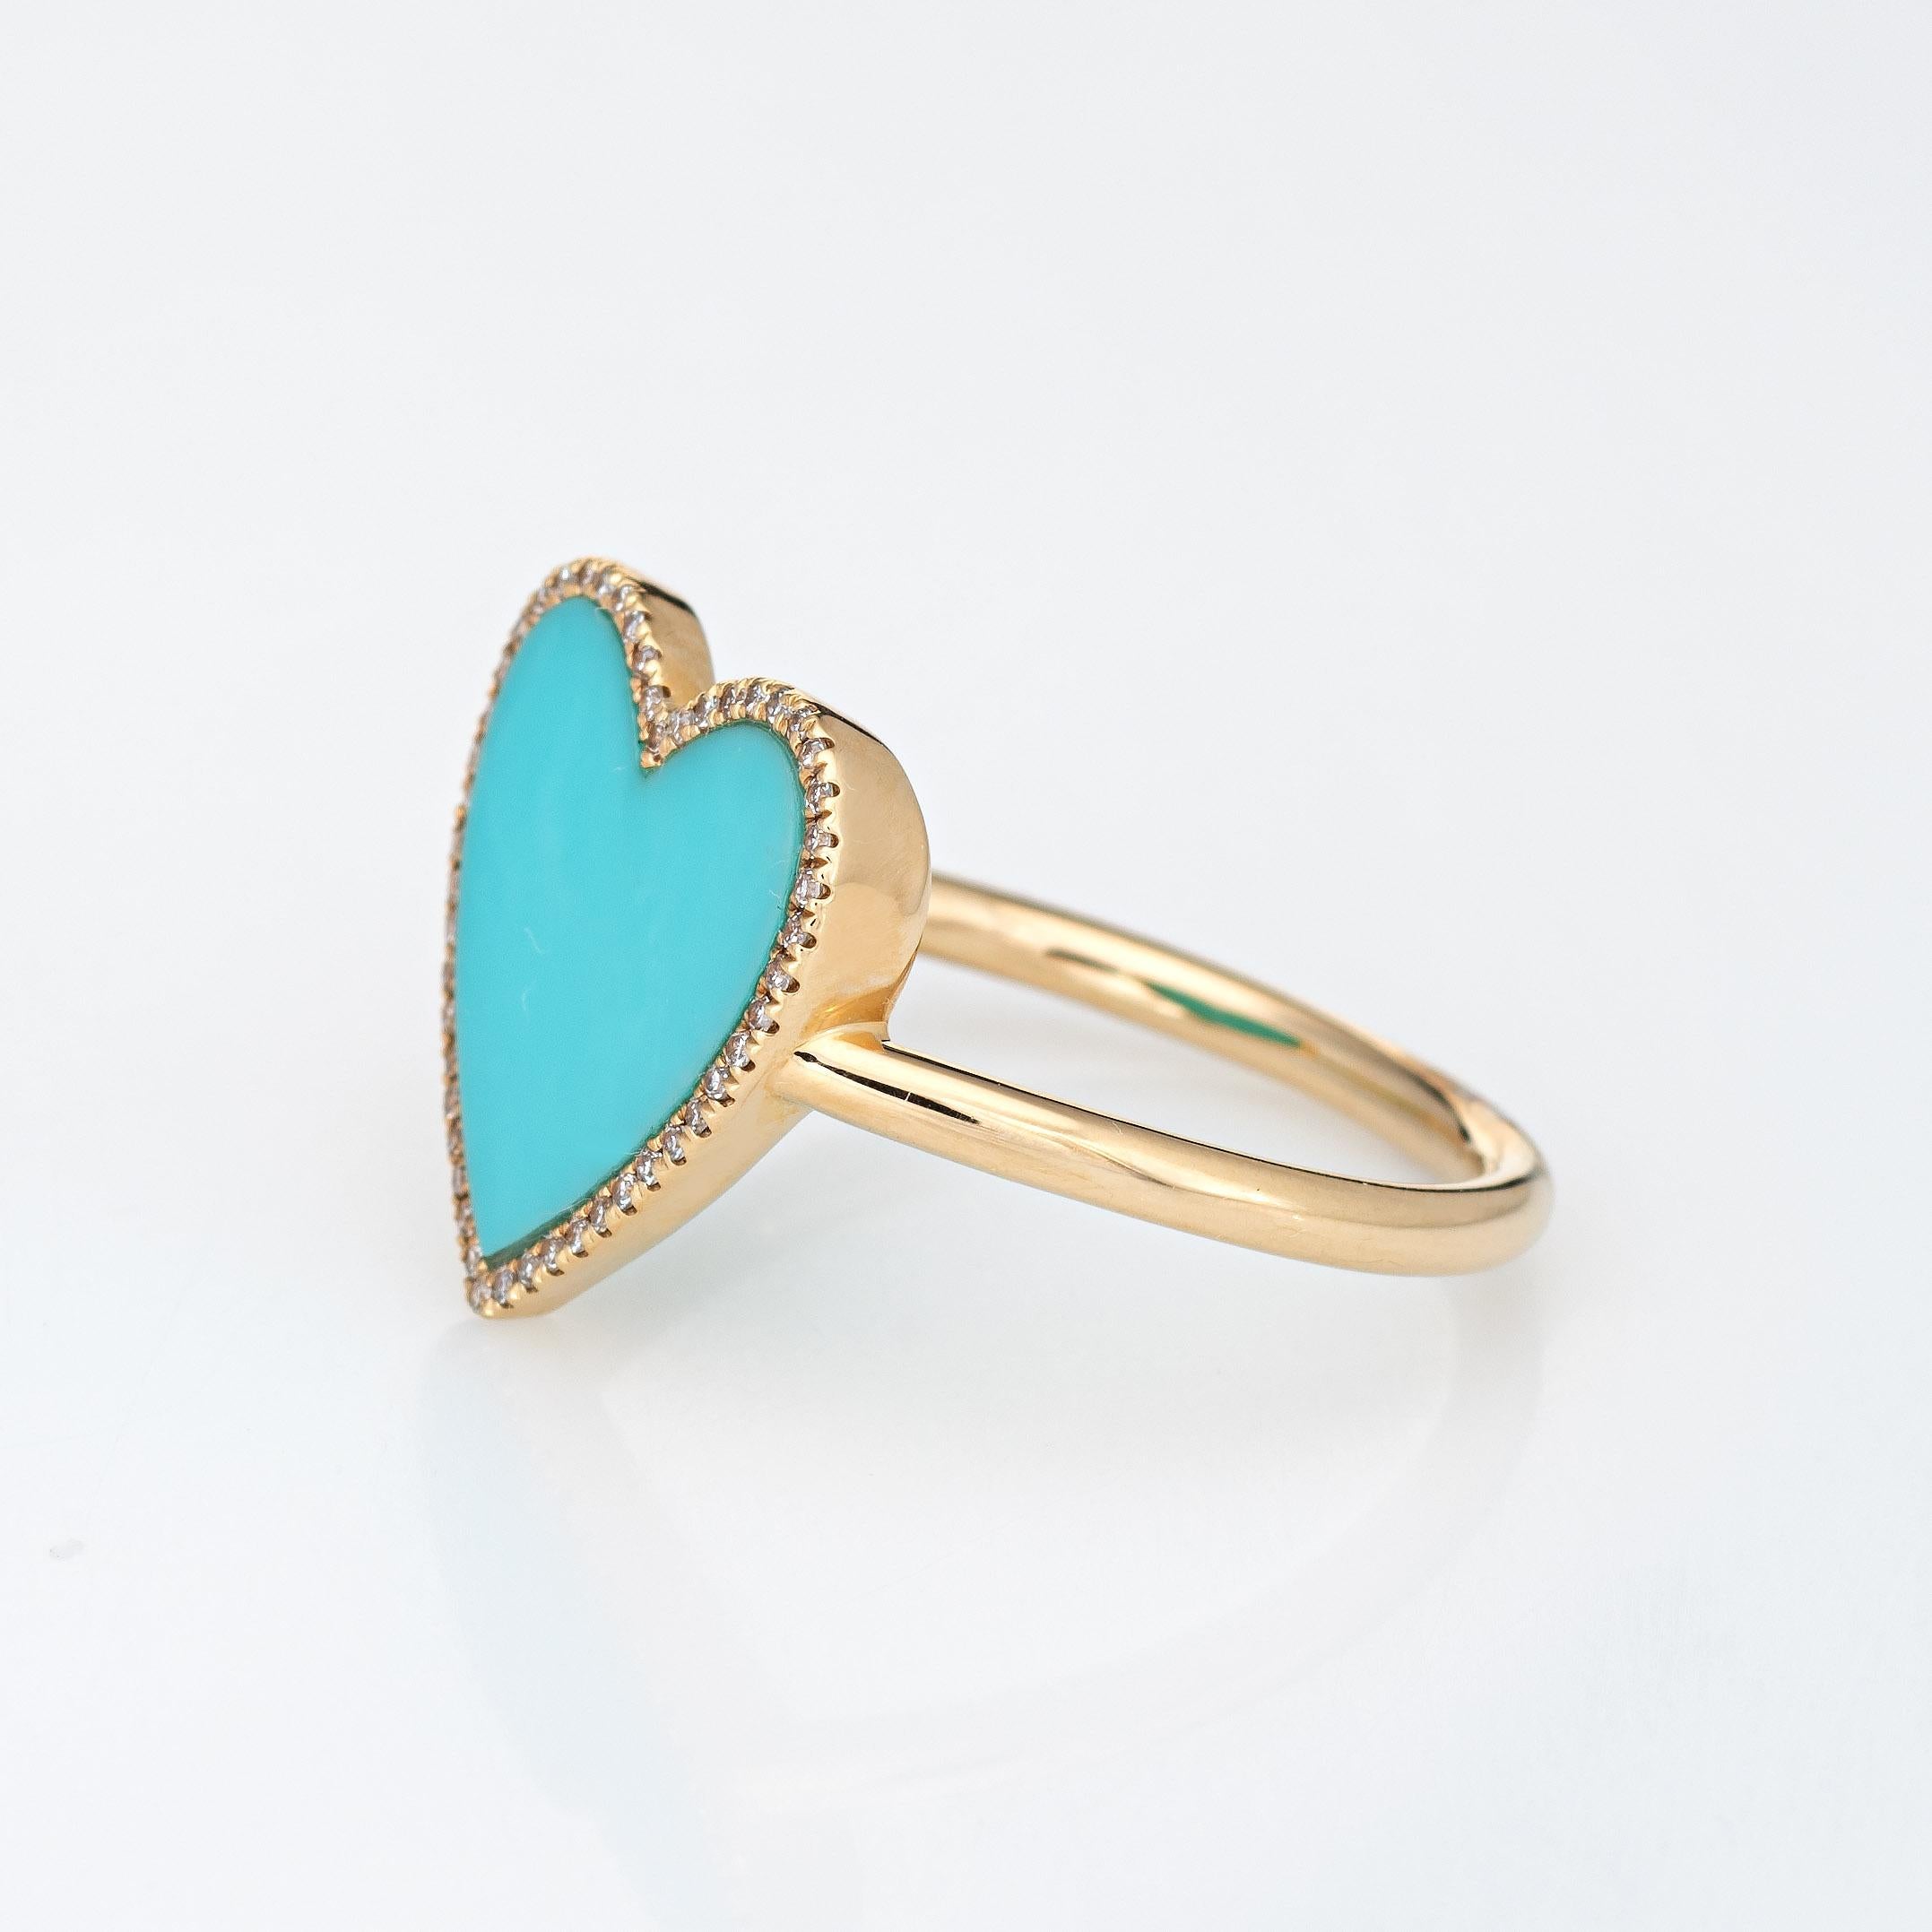 Modern Turquoise Diamond Heart Ring Estate 14k Yellow Gold Large Cocktail Jewelry